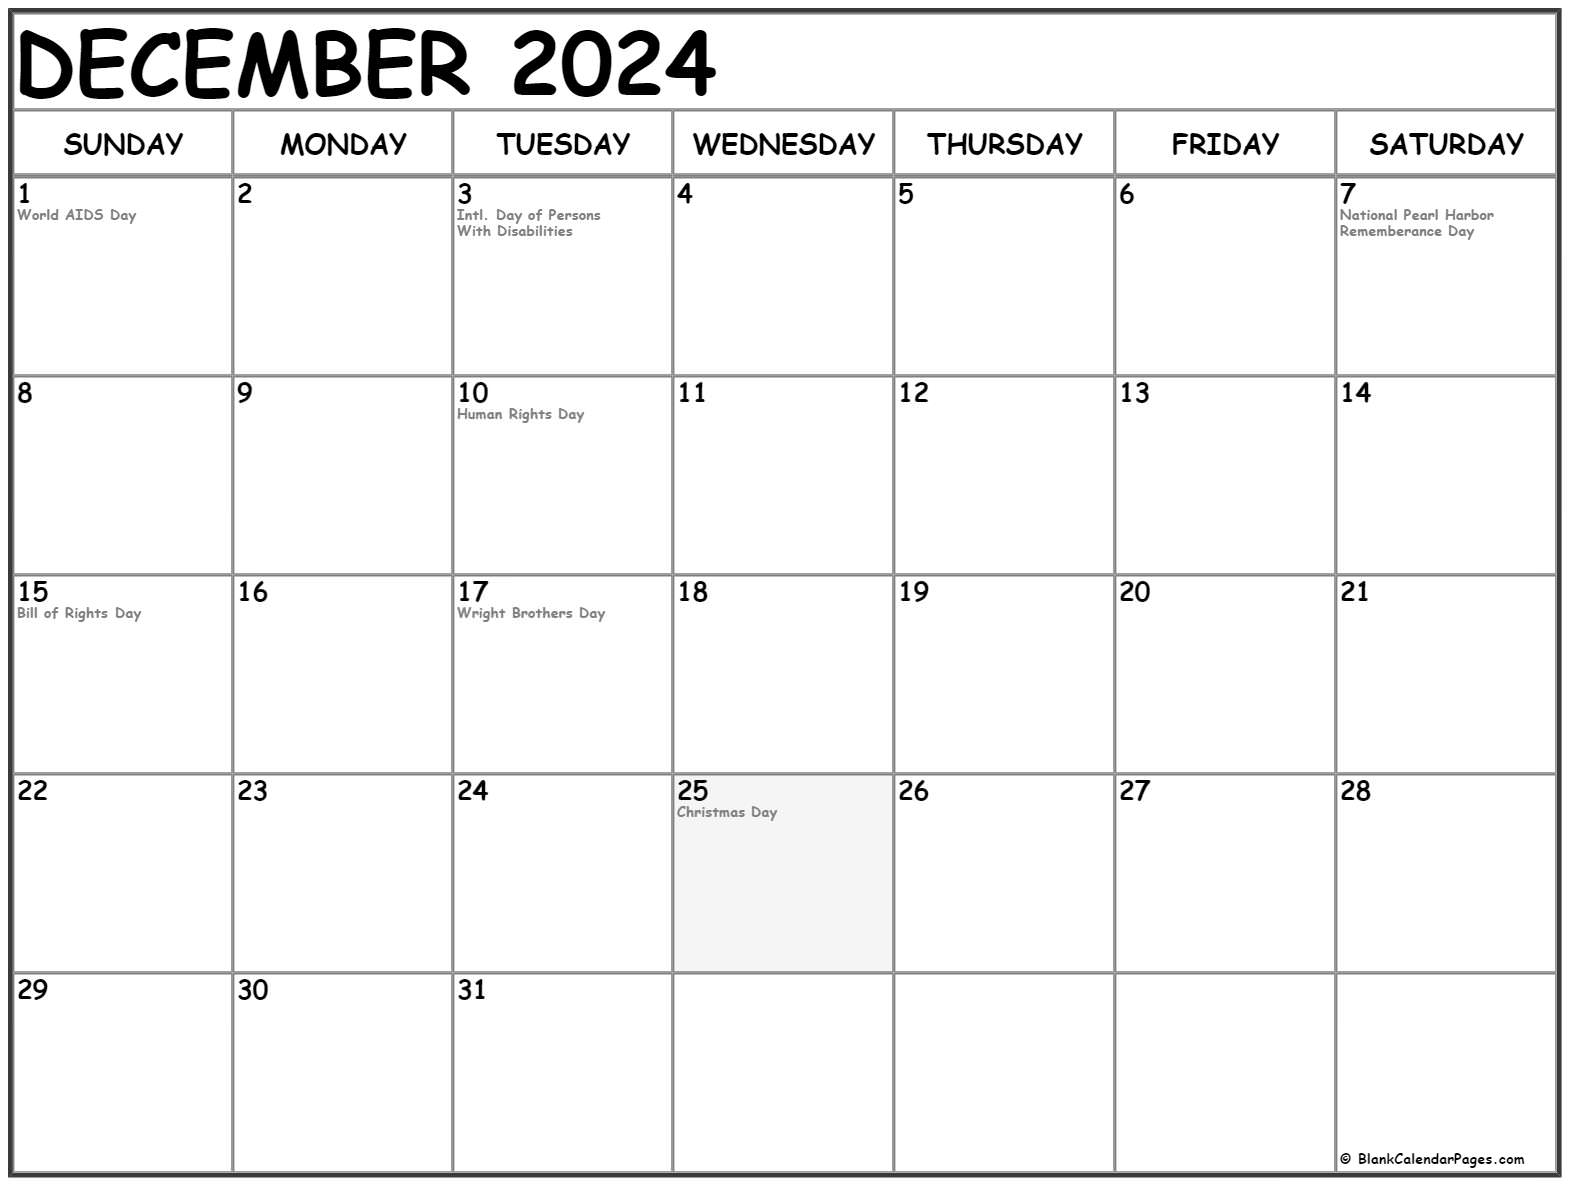 Collection of December 2018 calendars with holidays